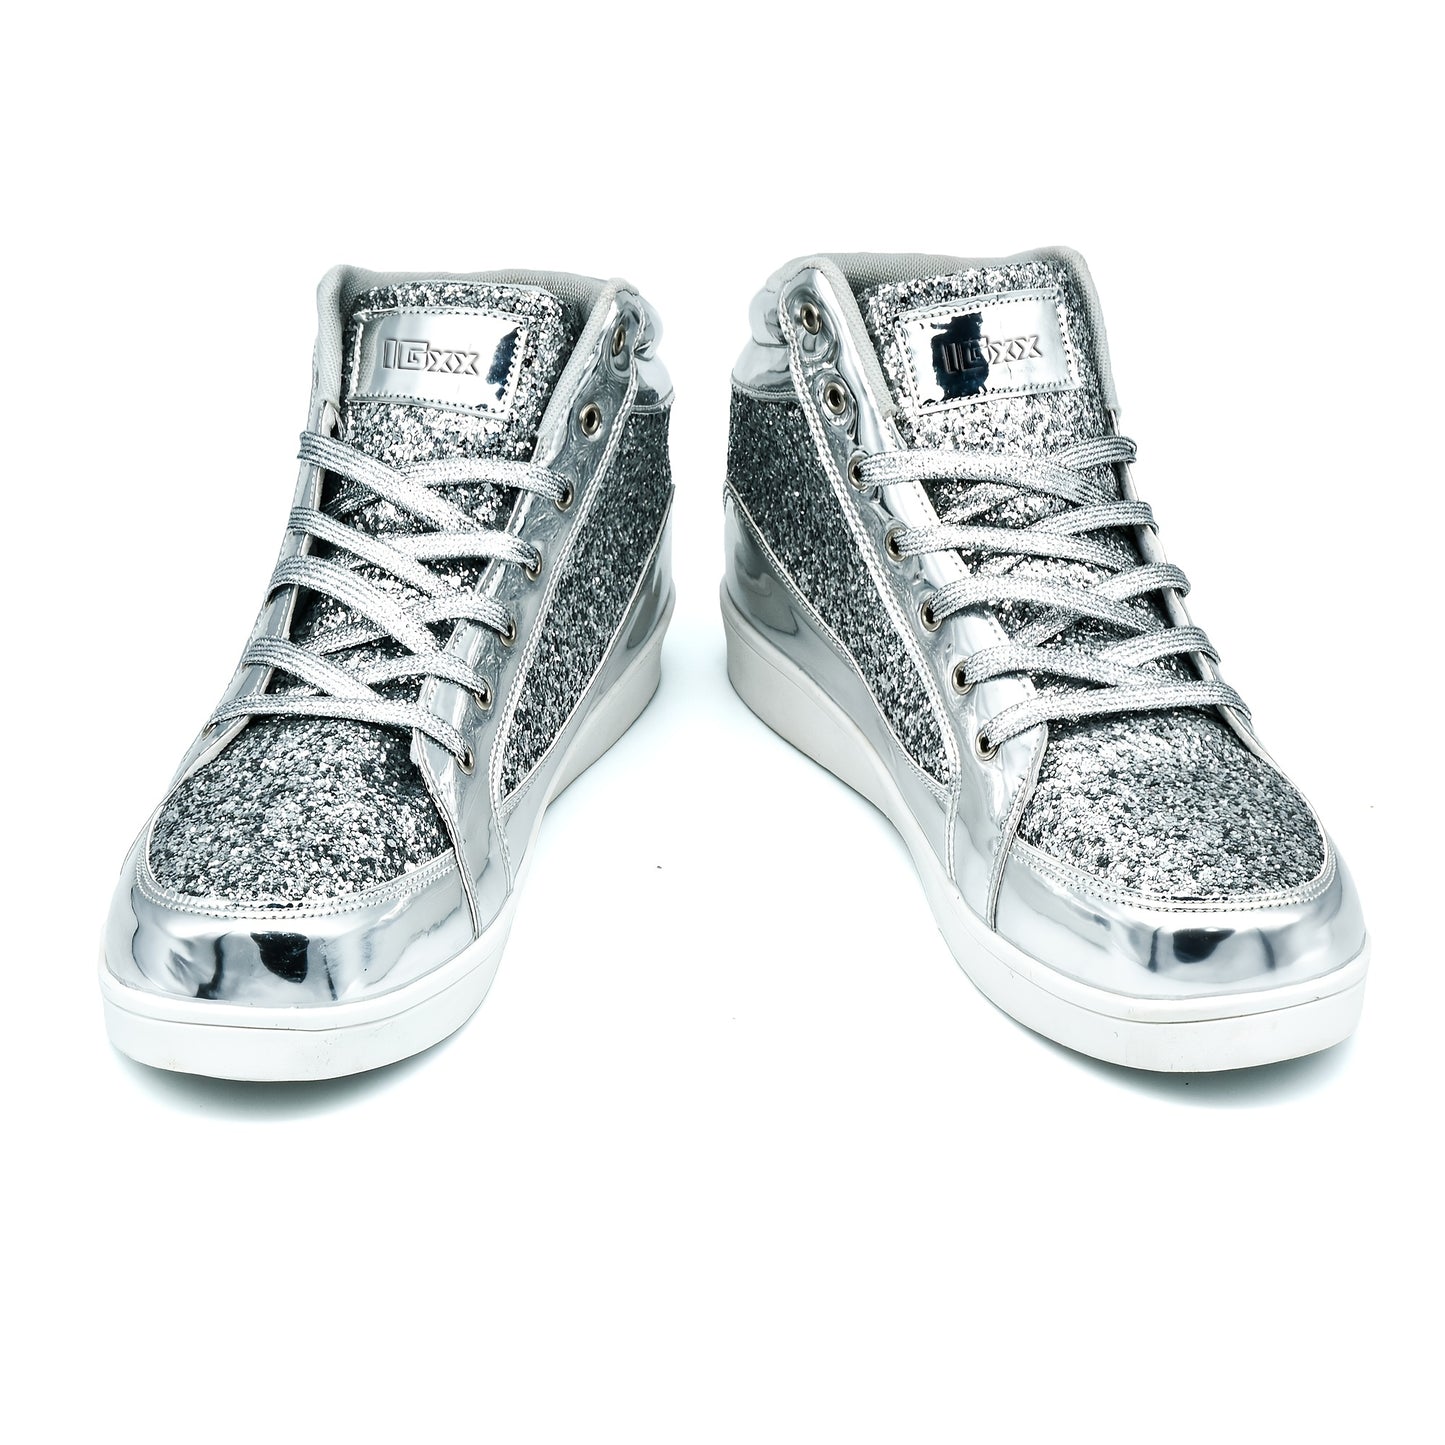 Men's High Top Sequin Shoes, Fashion Shiny Casual Sneakers For Parties & Discos, Golden\u002FSilver